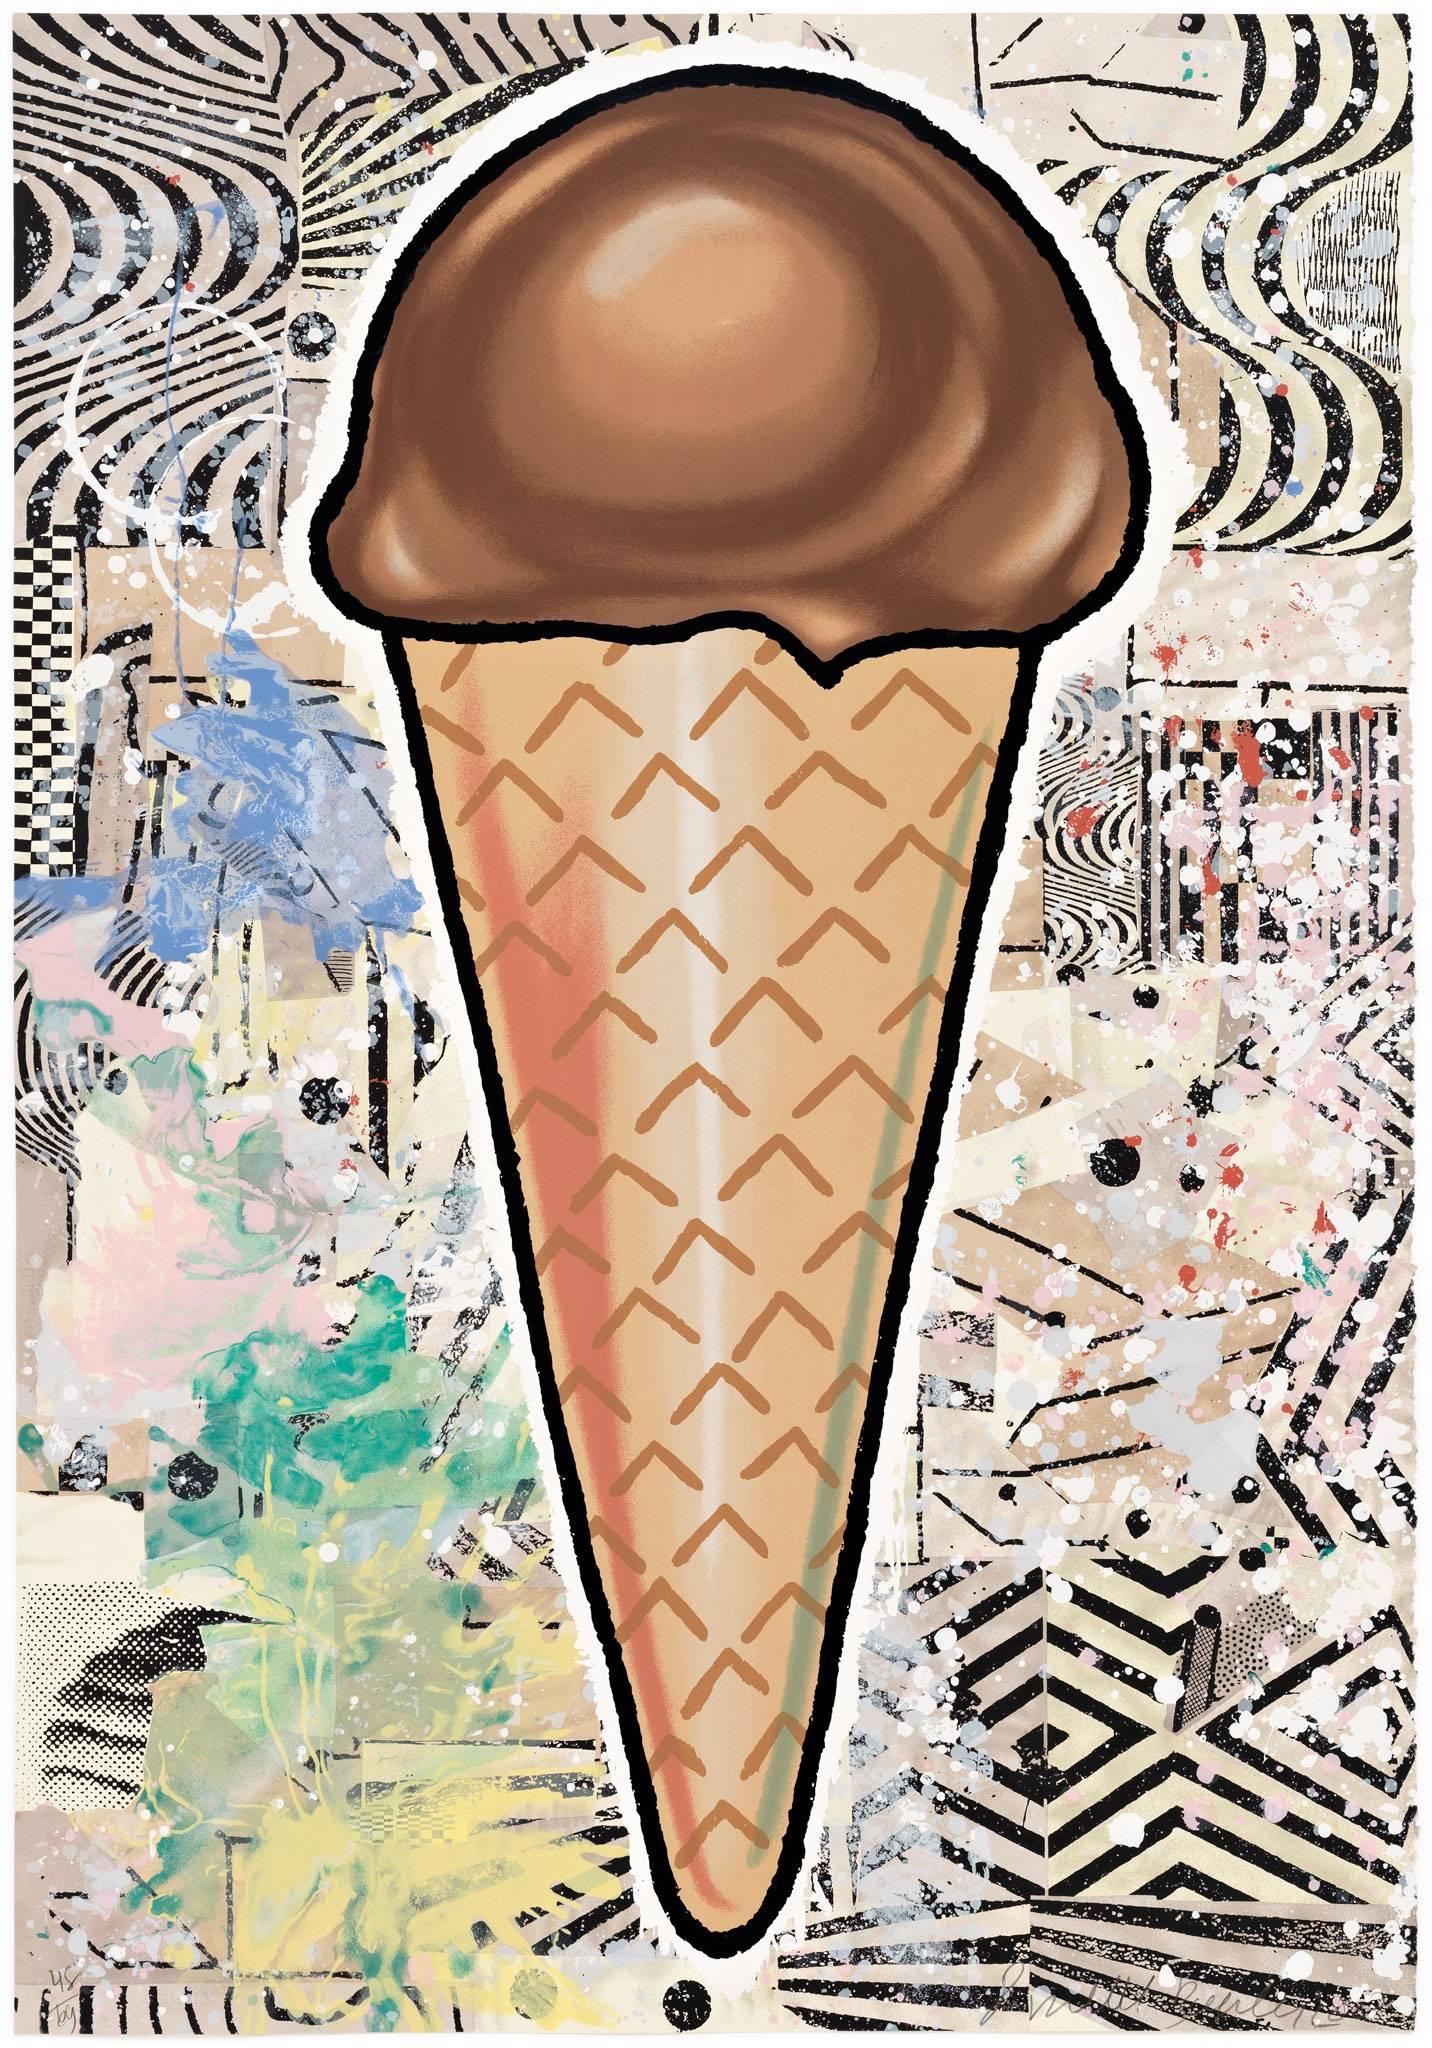 Chocolate Cone - Print by Donald Baechler